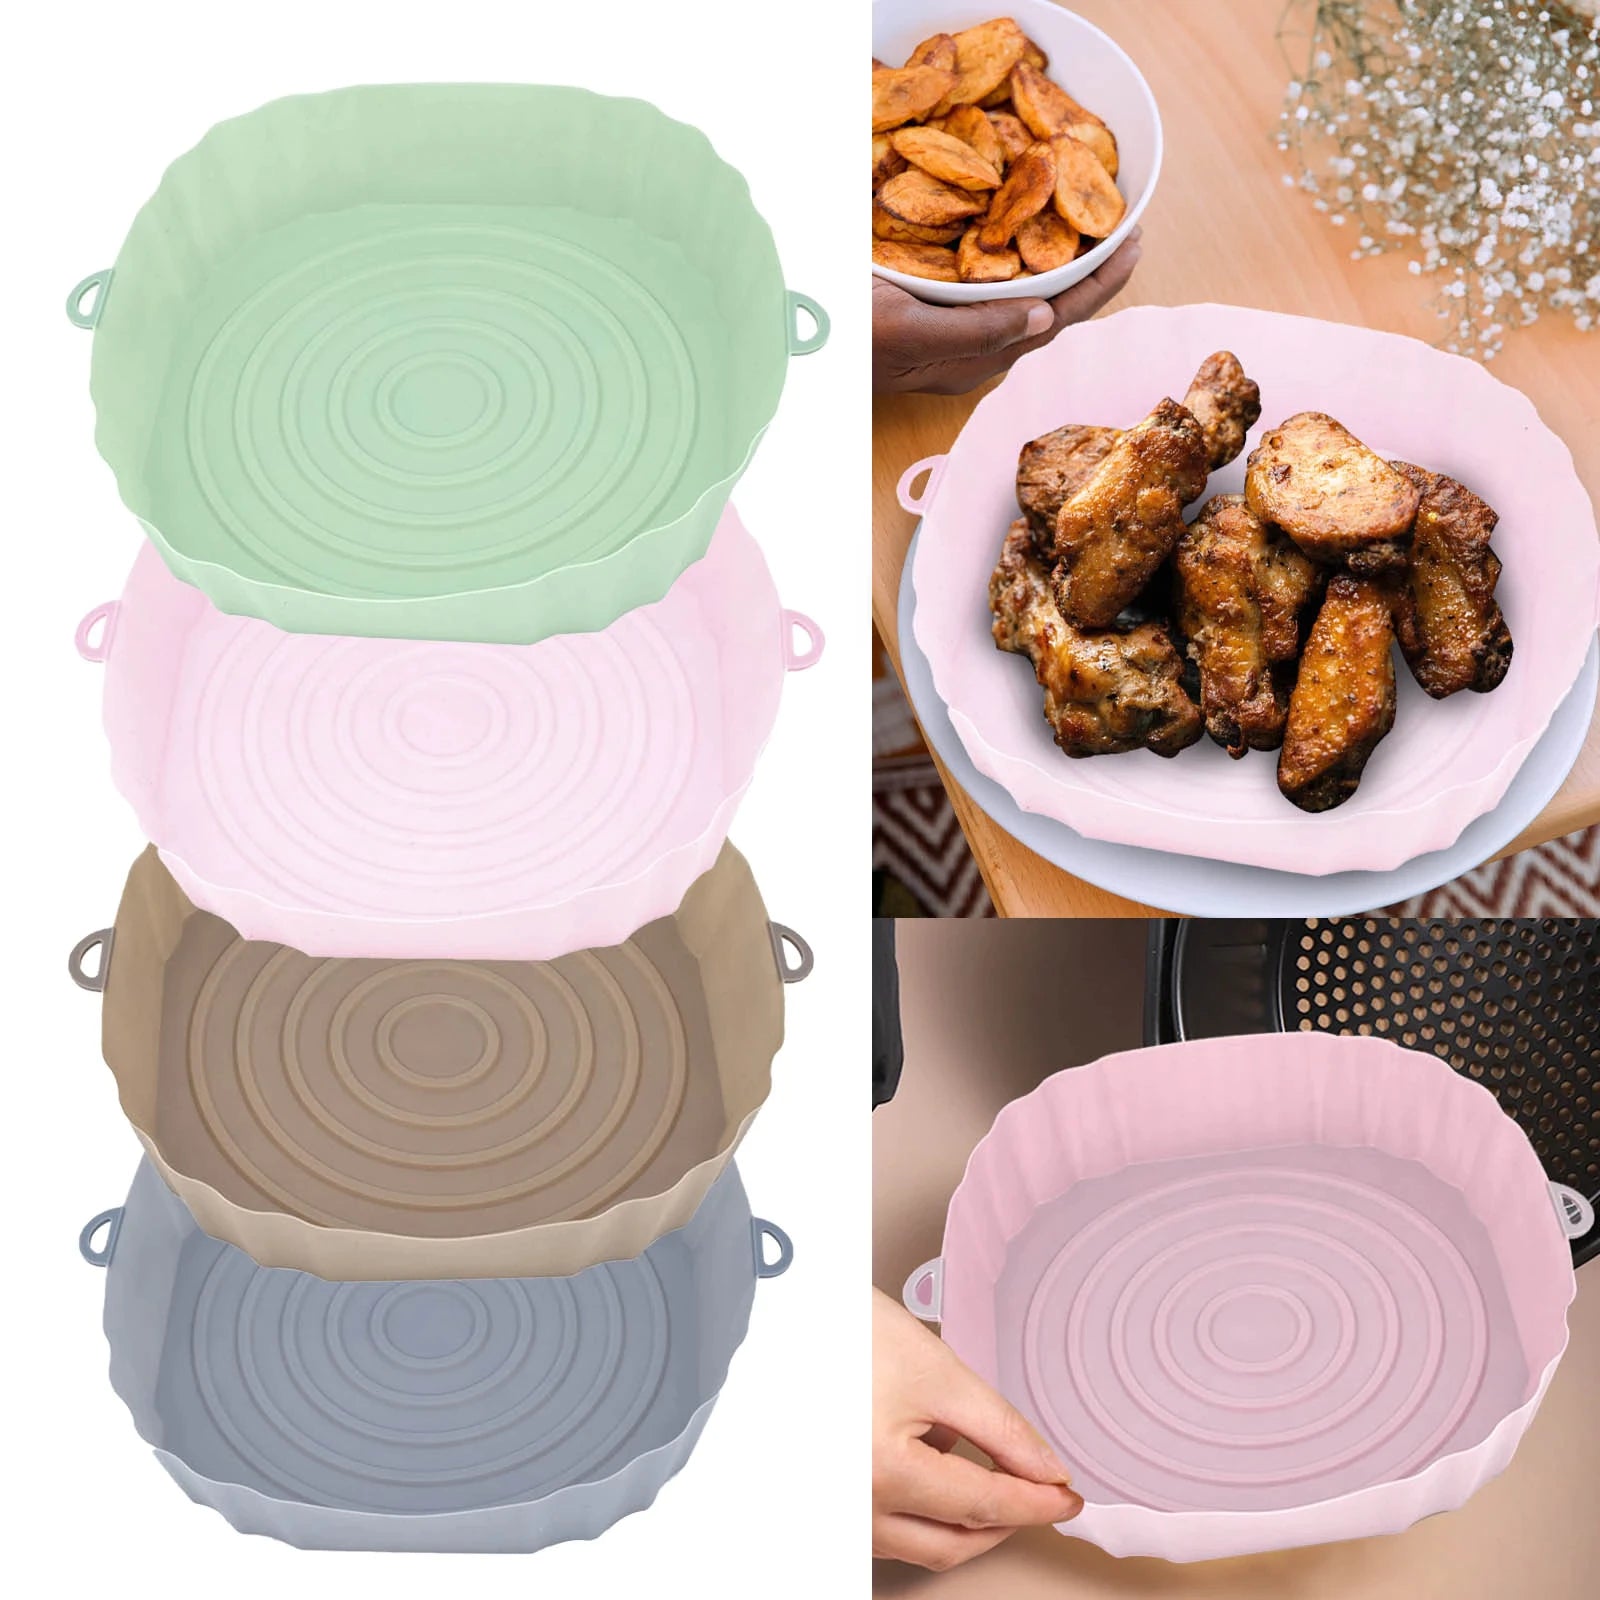 http://kitchncatch.com/cdn/shop/products/Air-Fryer-Baking-Tray-Silicone-Pot-Nonstick-Airfryer-Baking-Form-Pastry-Kitchen-Pizza-Mat-Silicone-Basket.jpg_Q90.jpg__2.webp?v=1661859001